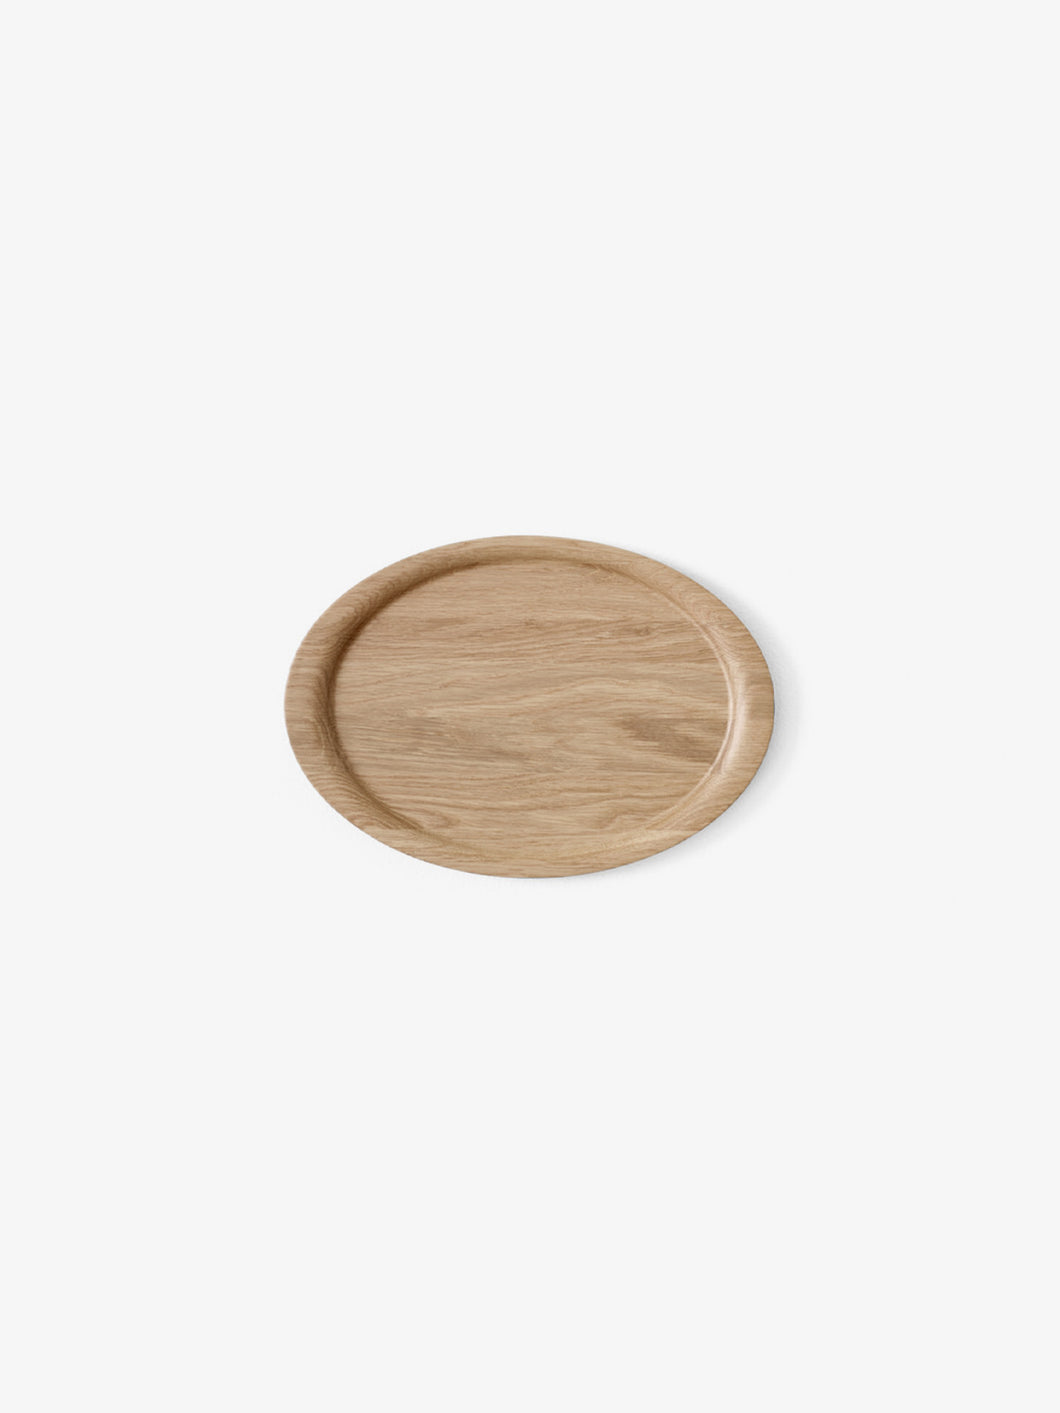 SMALL COLLECT TRAY, LACQUERED OAK